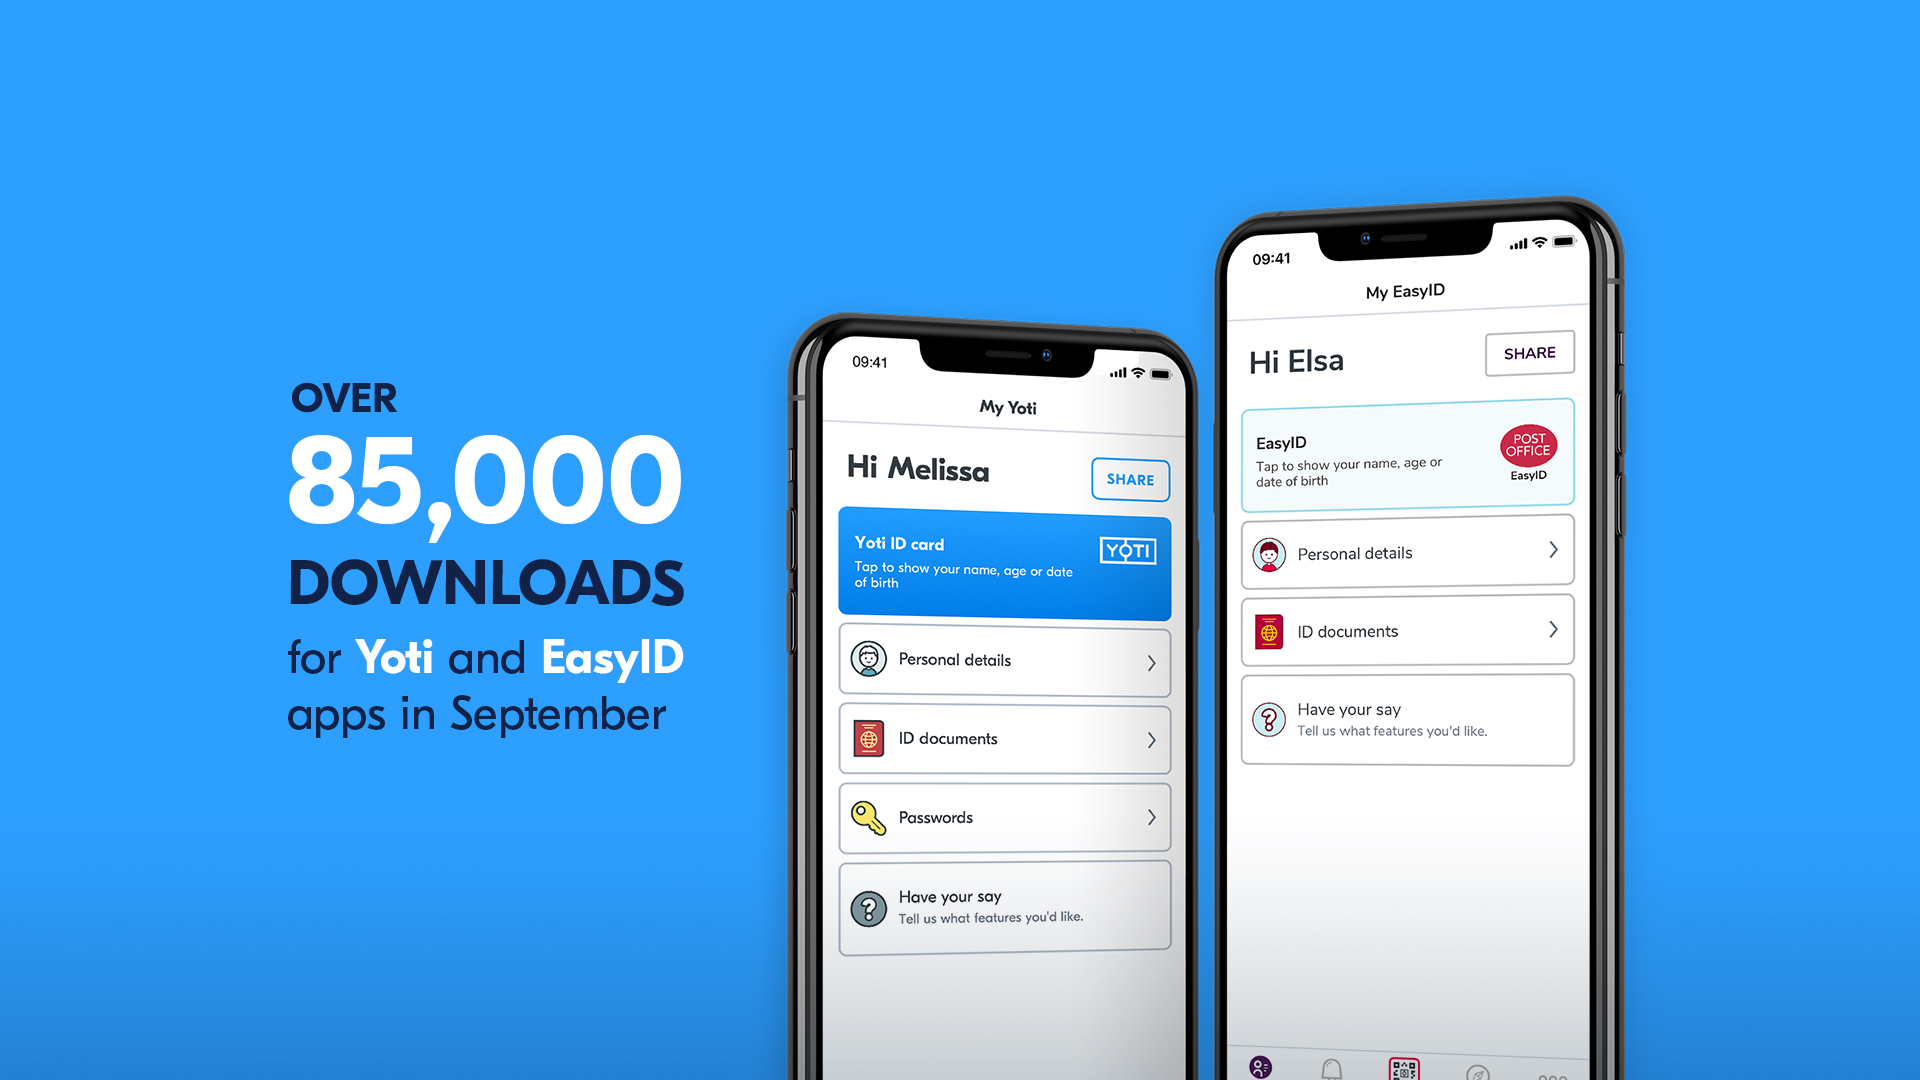 Over 85,000 downloads for Yoti and EasyID apps in September